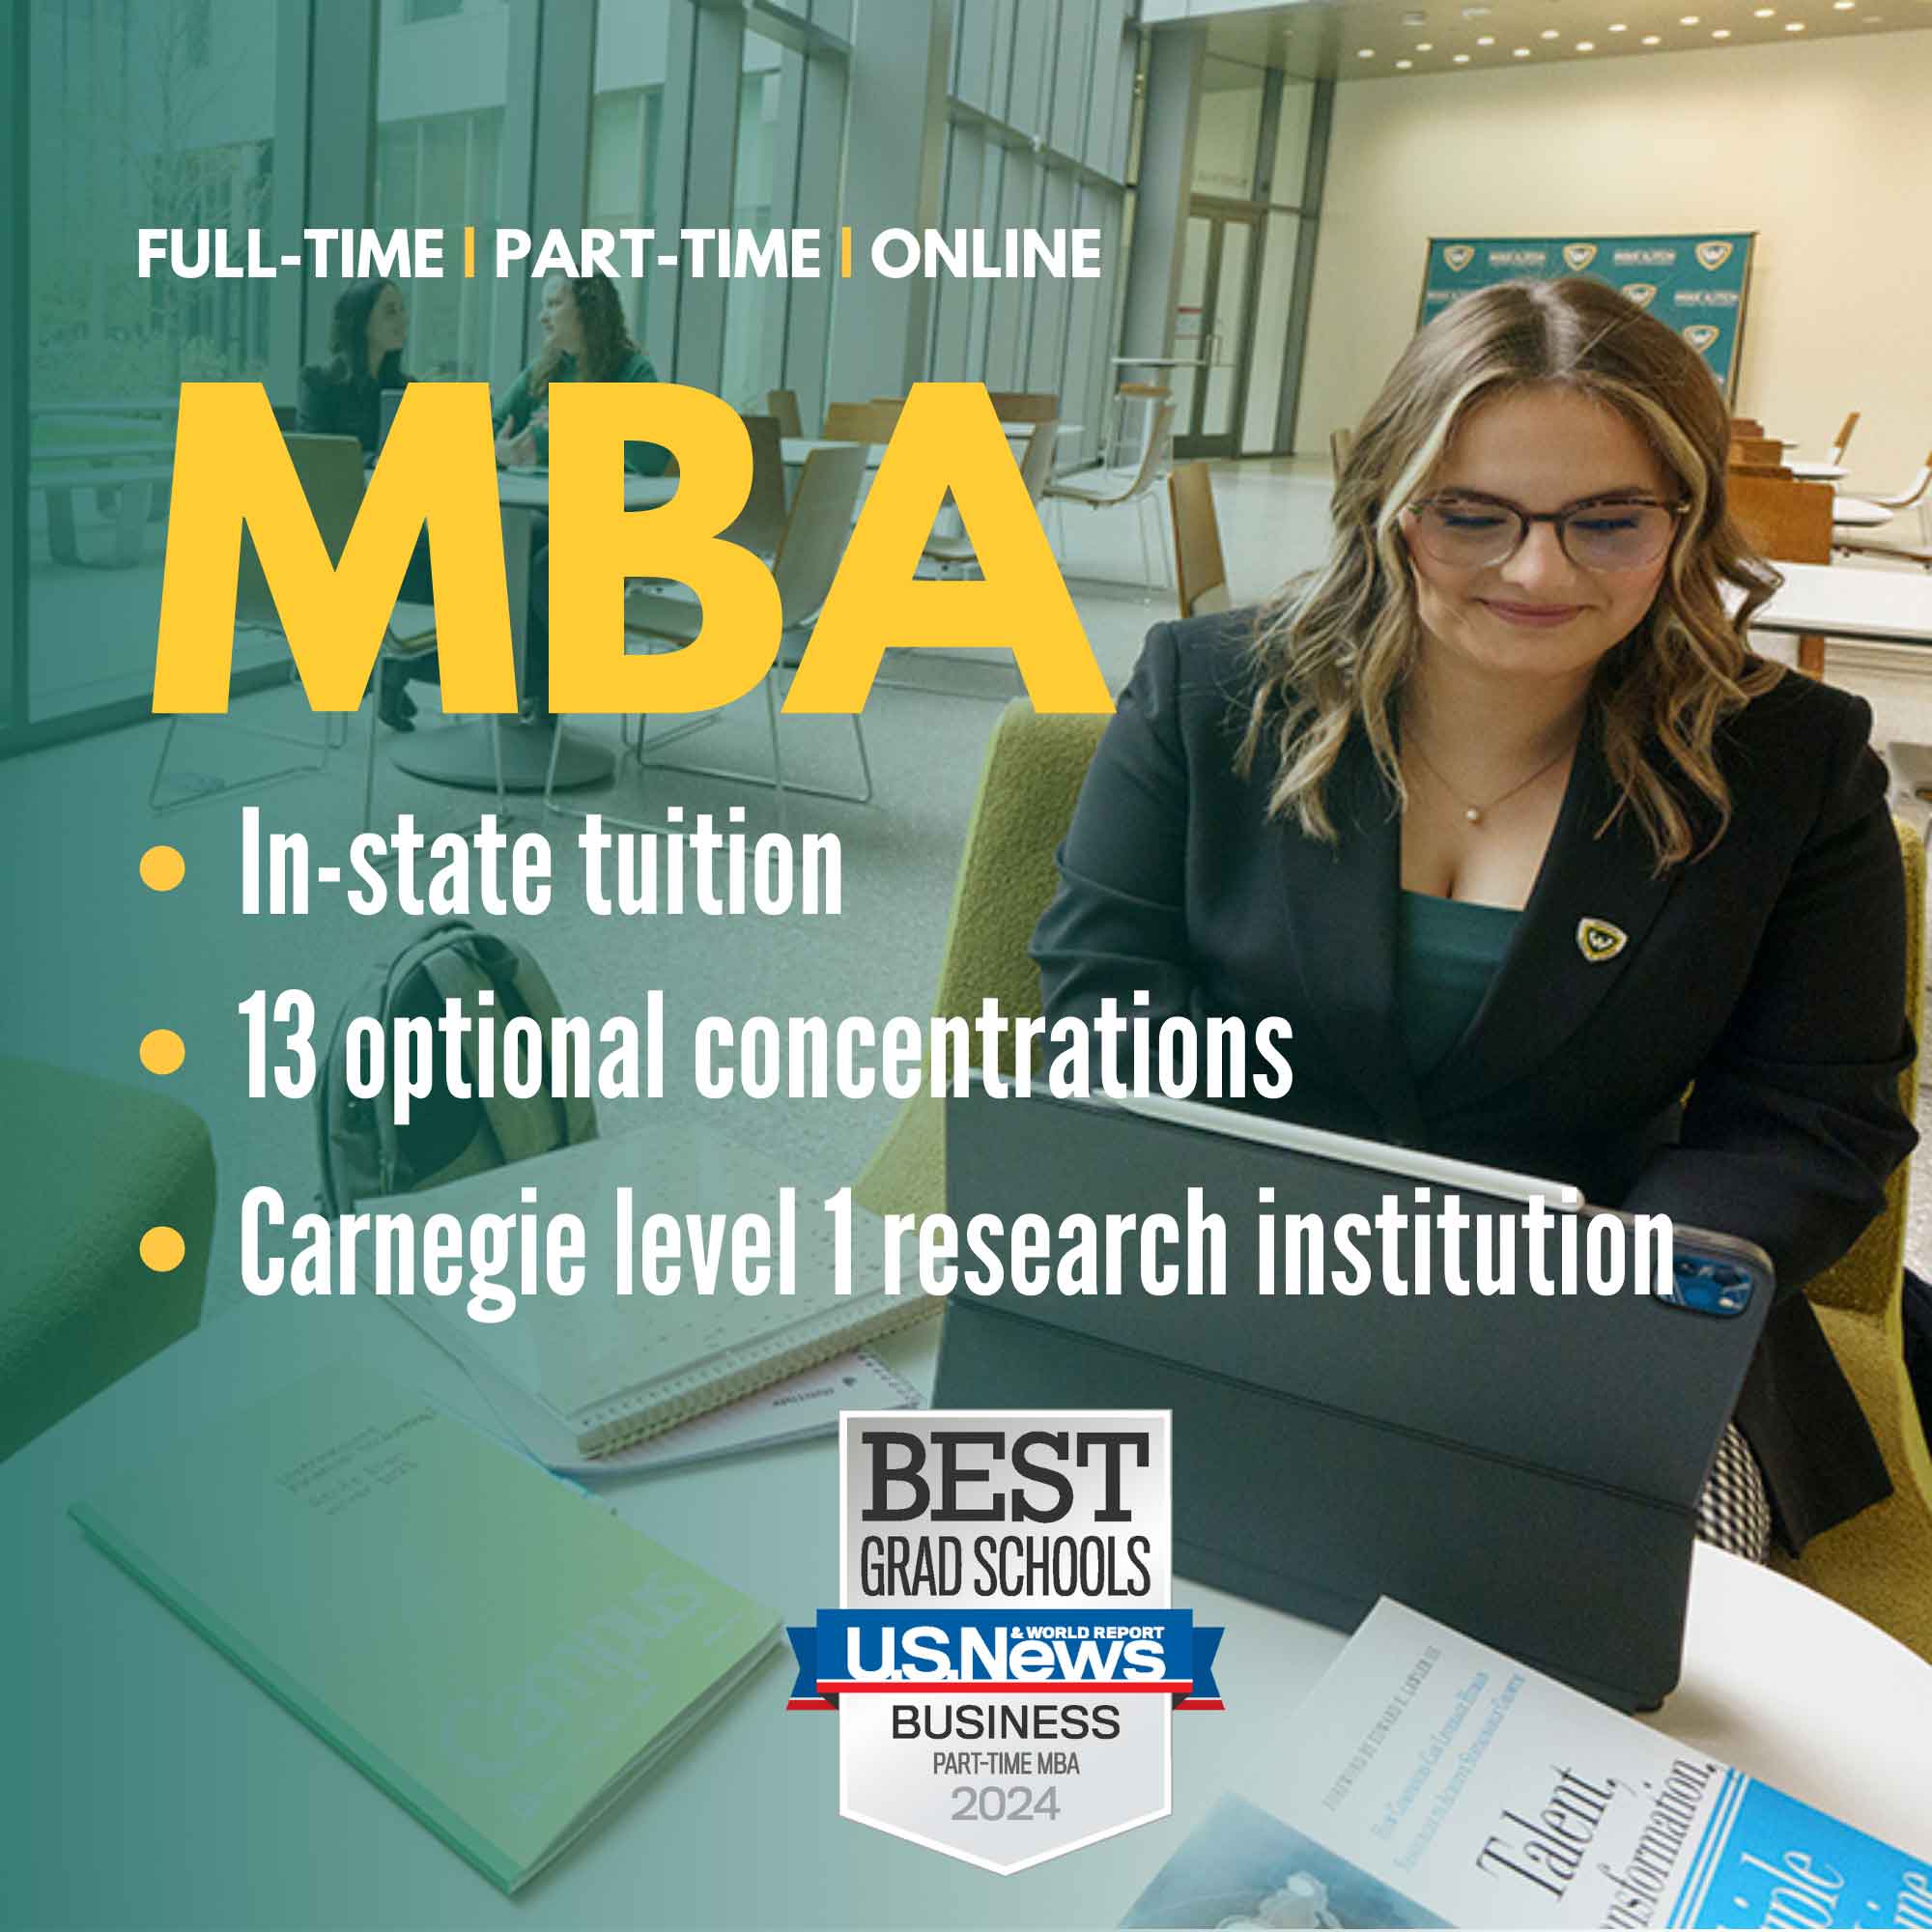 Accredited, flexible and cost-effective MBA program online modality puts your career goals within reach. Learn more.